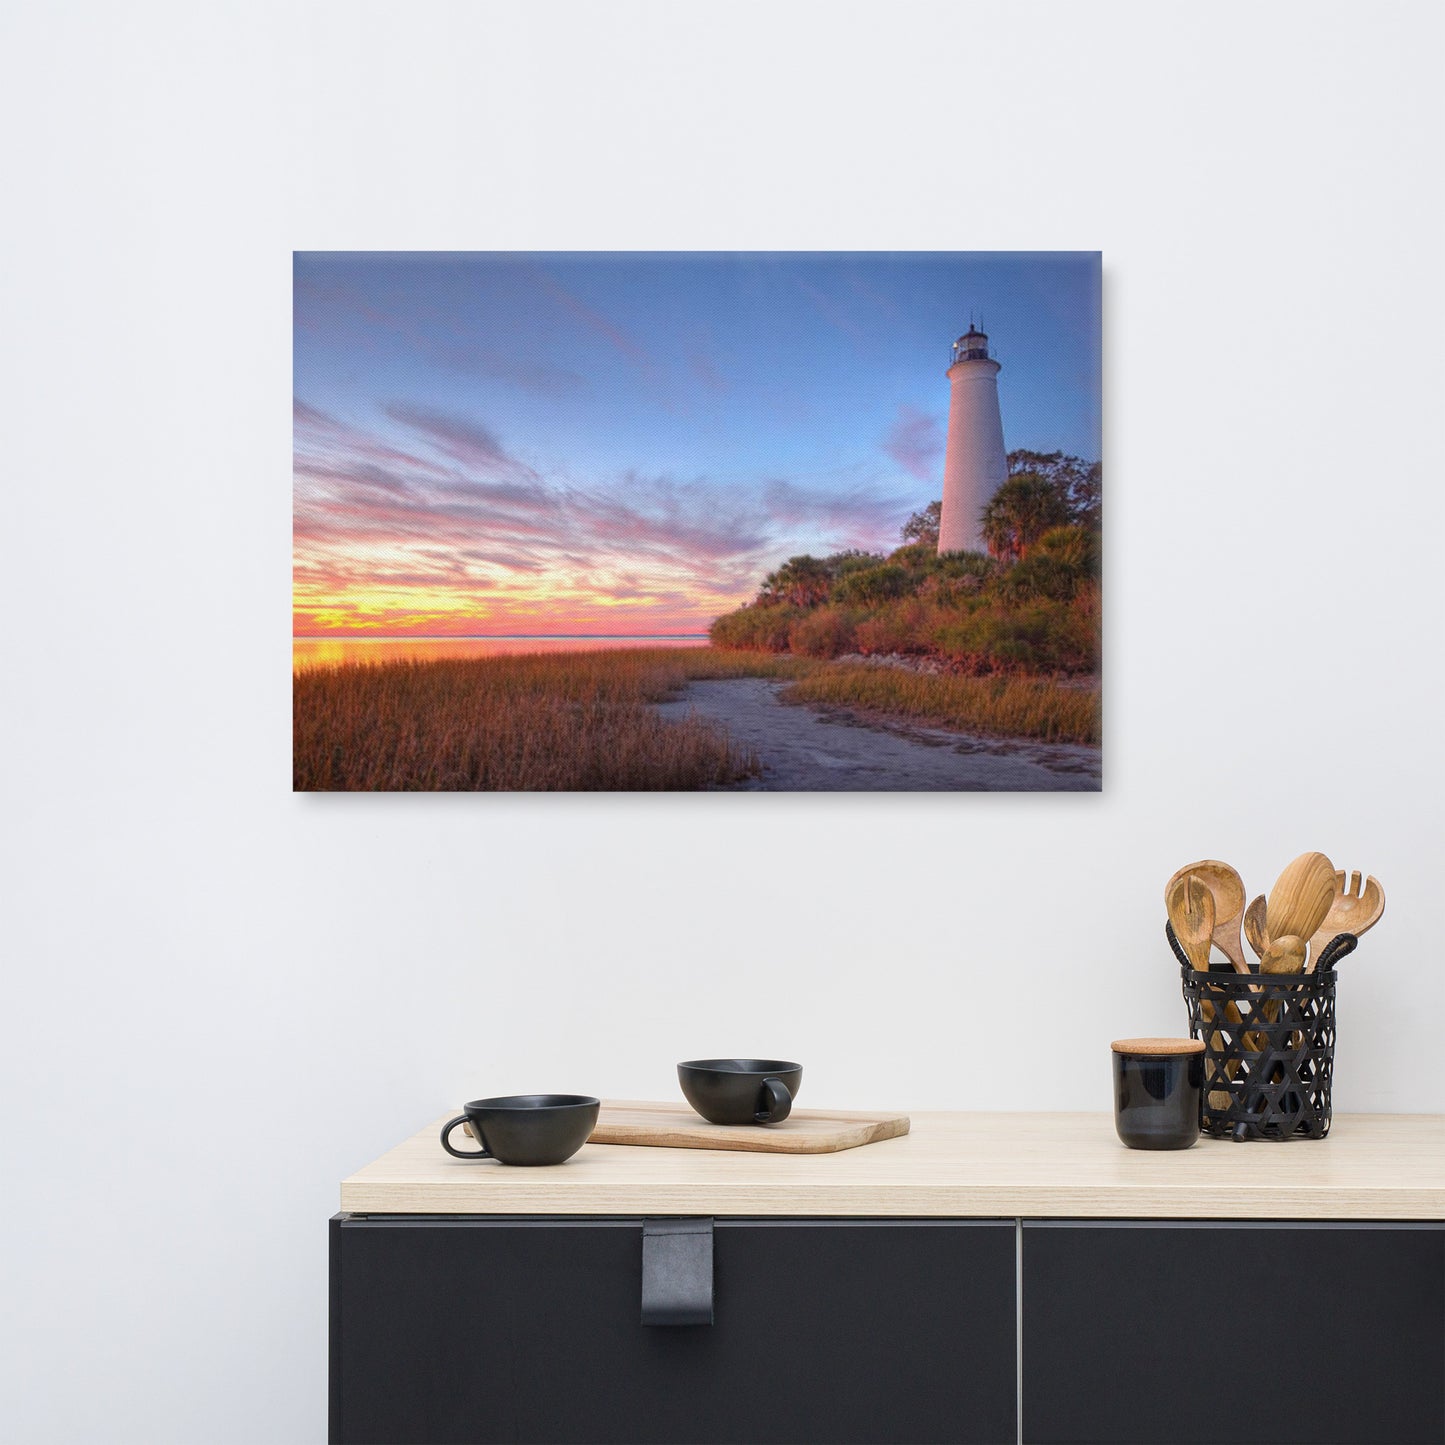 St. Marks Majesty A Beacon of Tranquility Lighthouse Architectural Coastal Beach Photograph Wall Art print